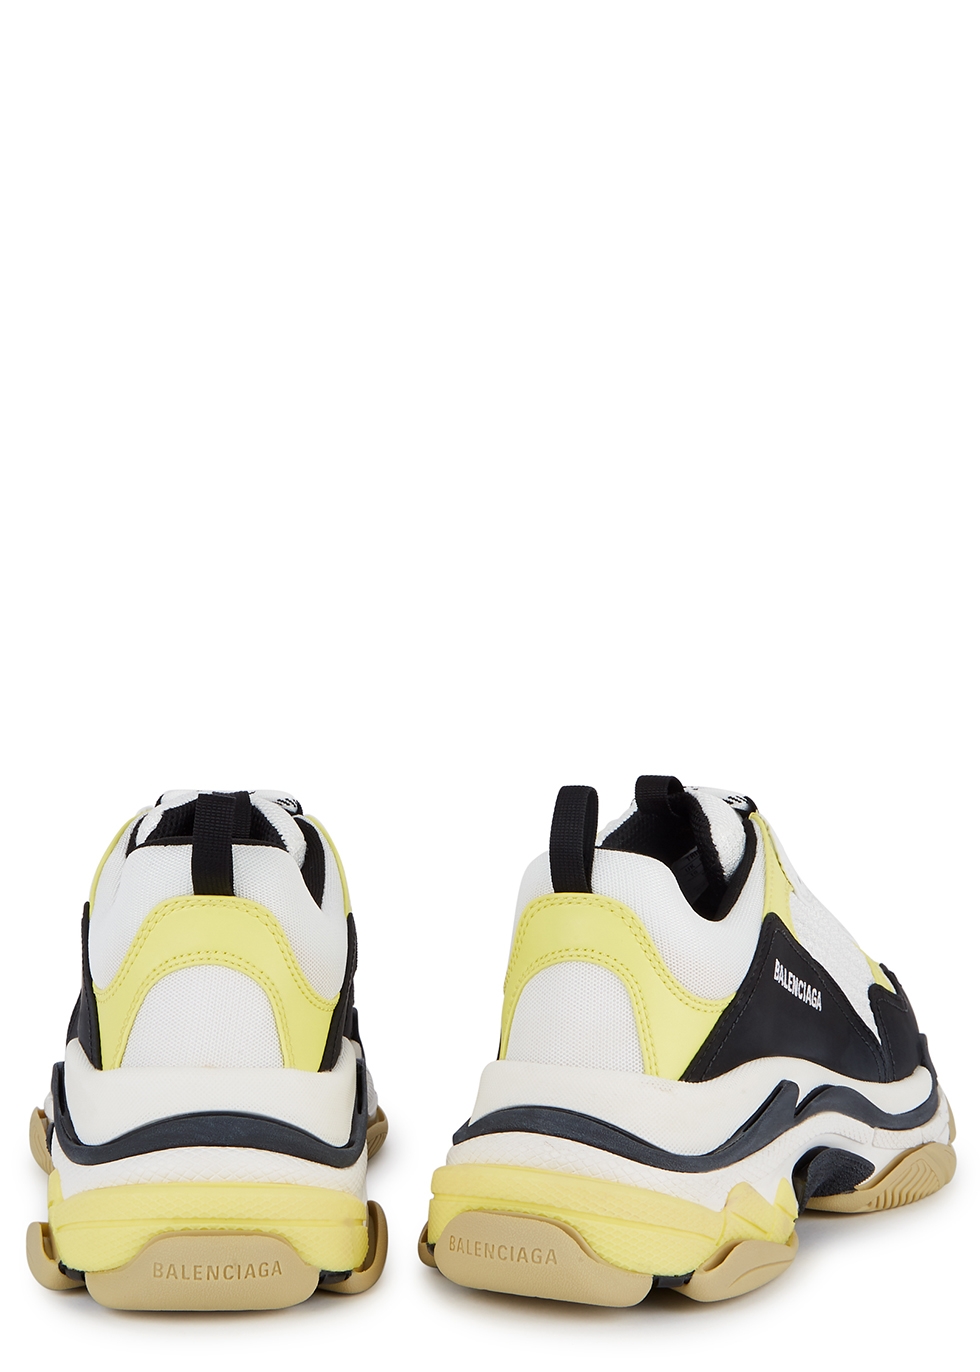 Sneakers white and grey Balenciaga Triple S Wiss on